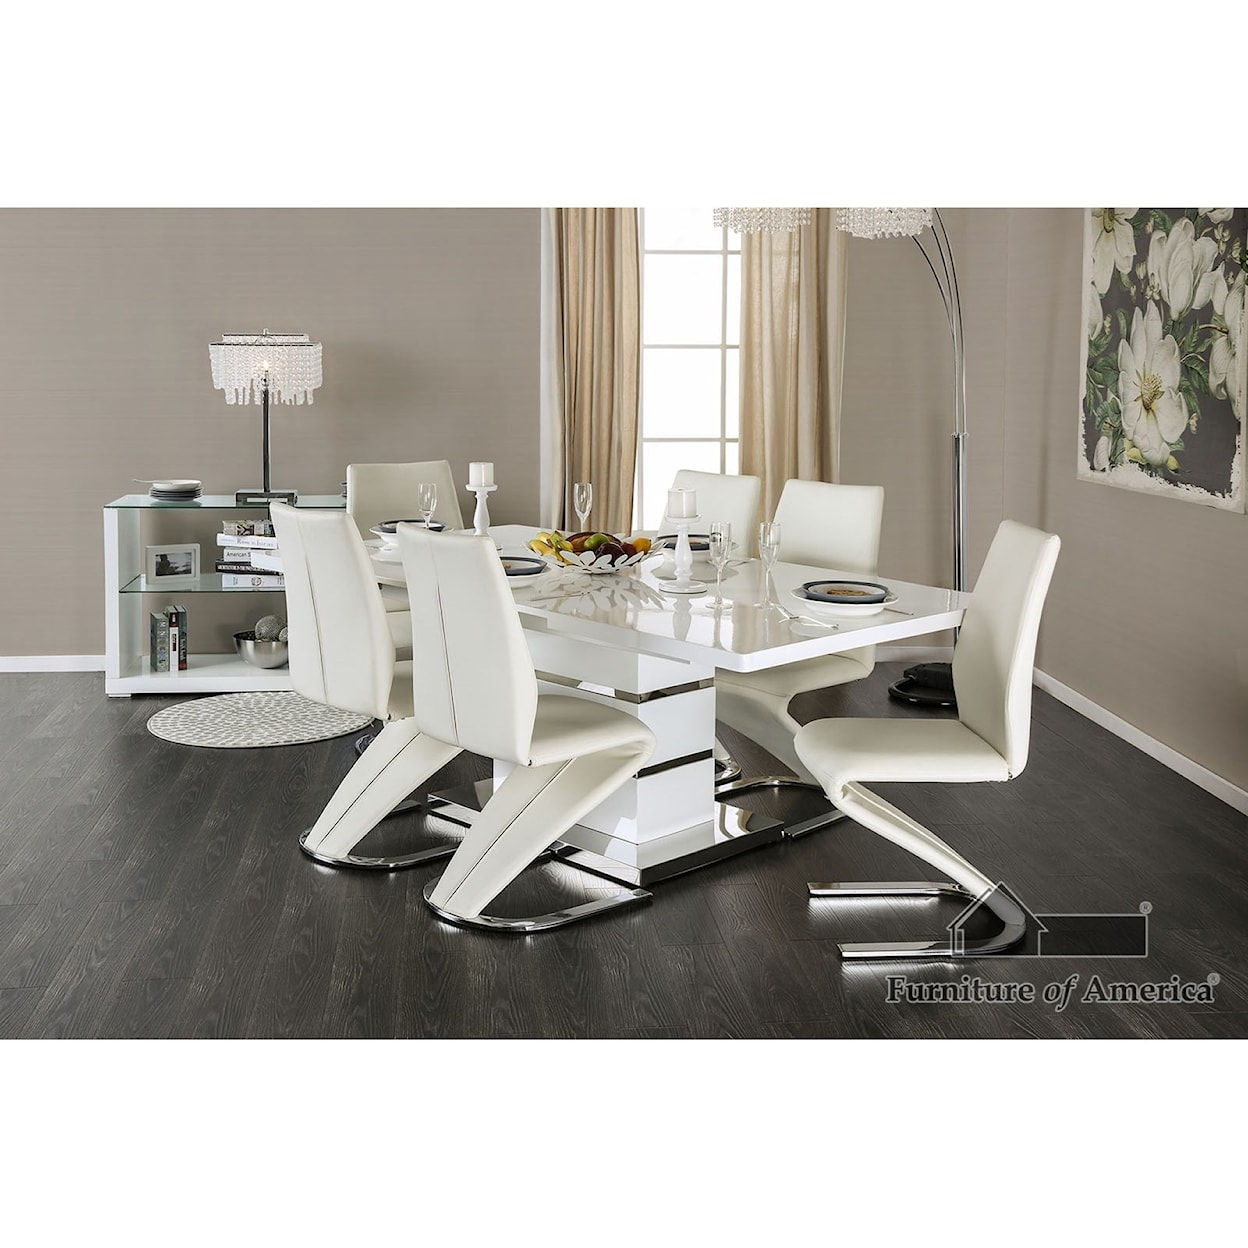 FUSA Midvale Dining Table